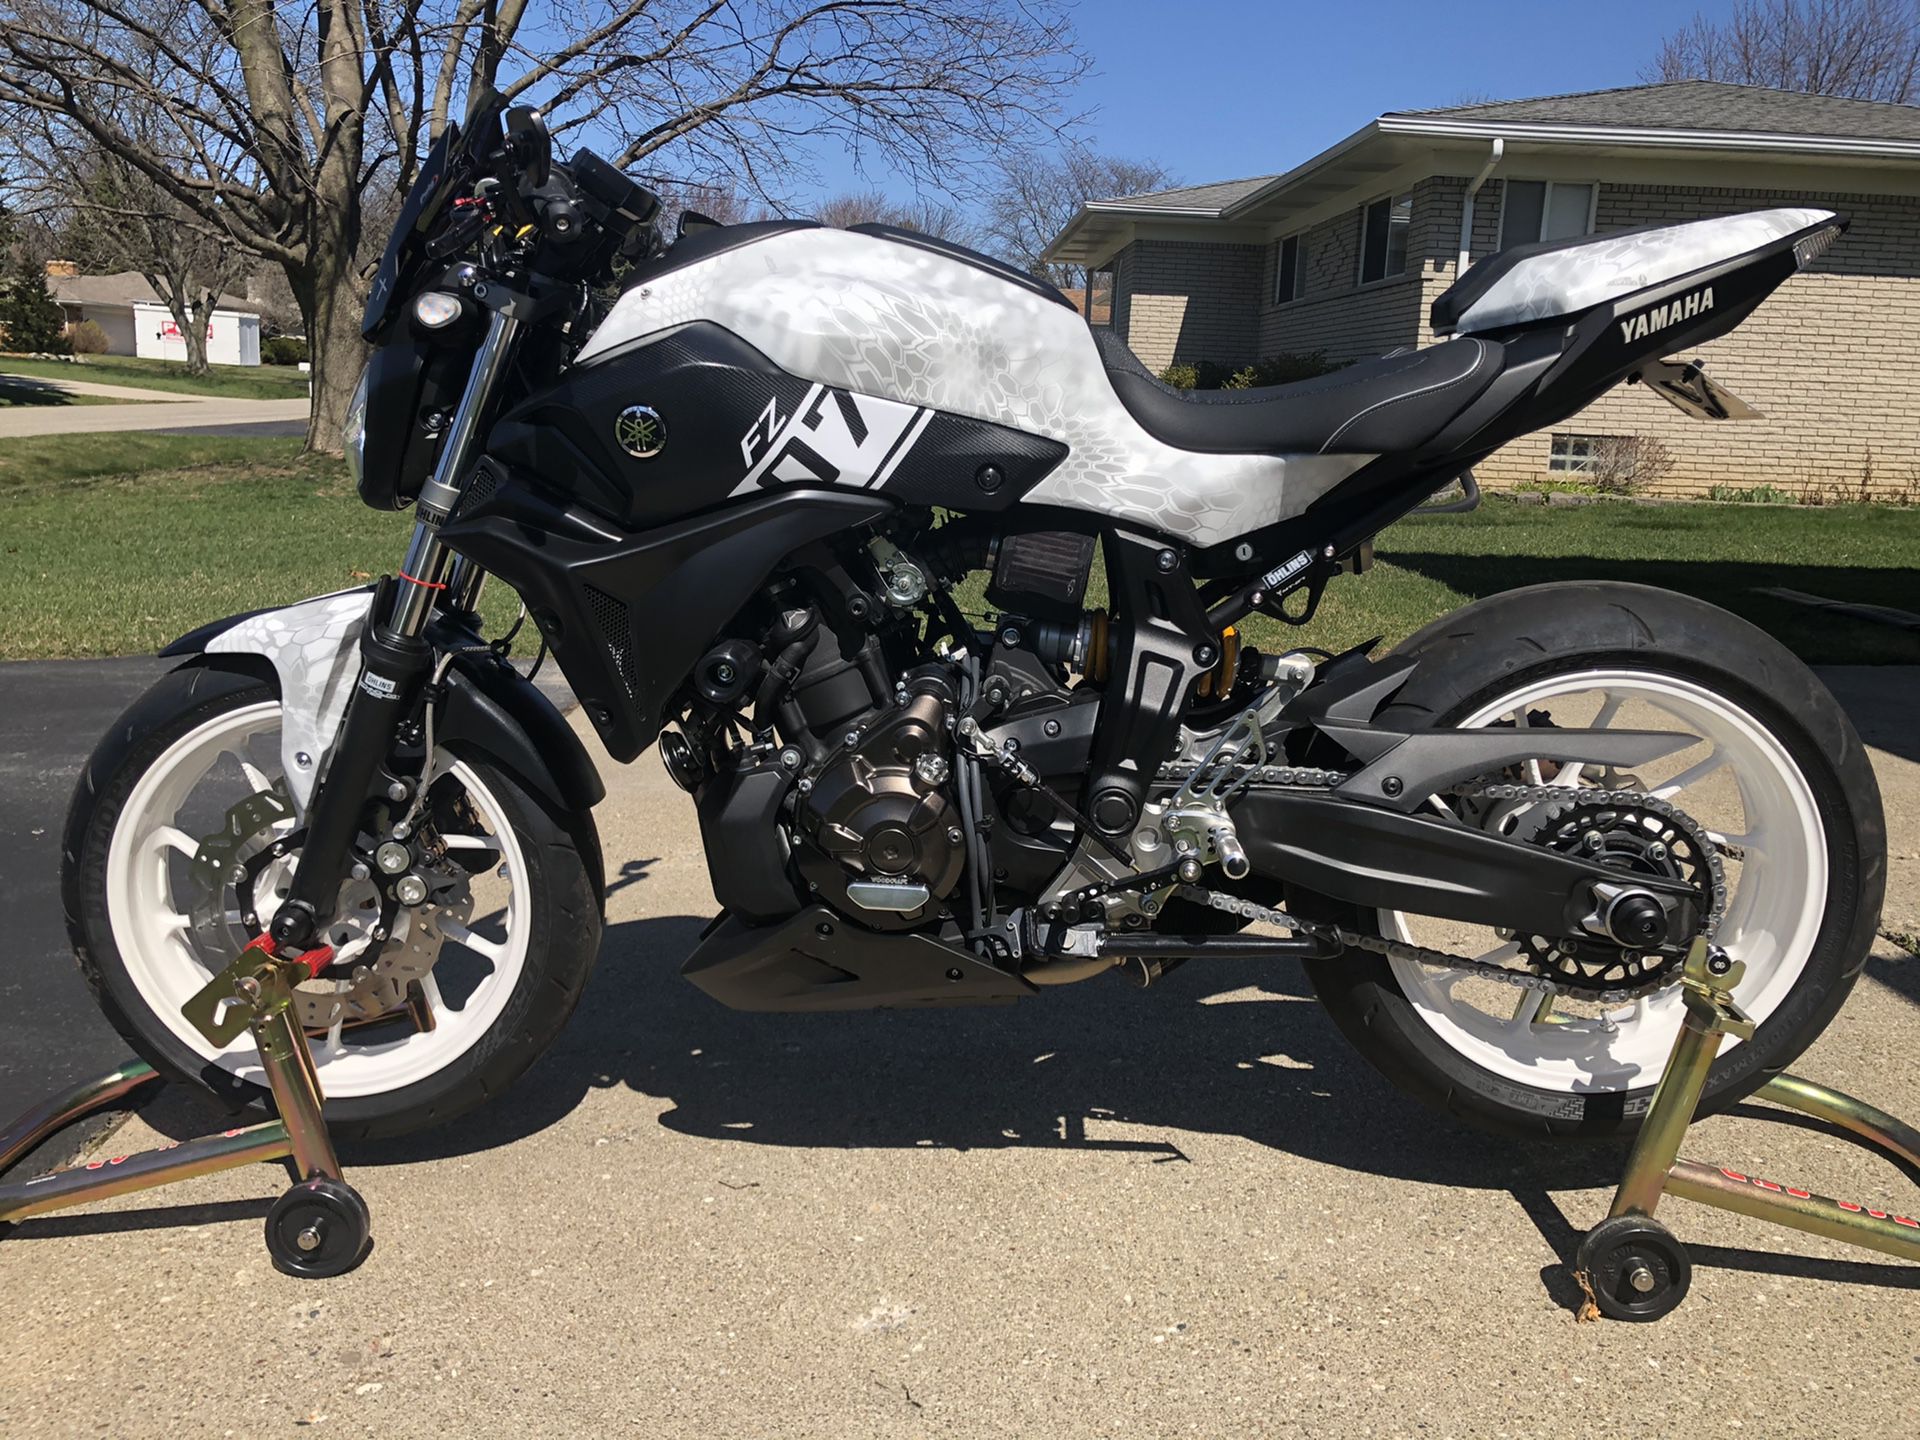 2017 FZ-07 Ready for Street or Track “Pending Sale”